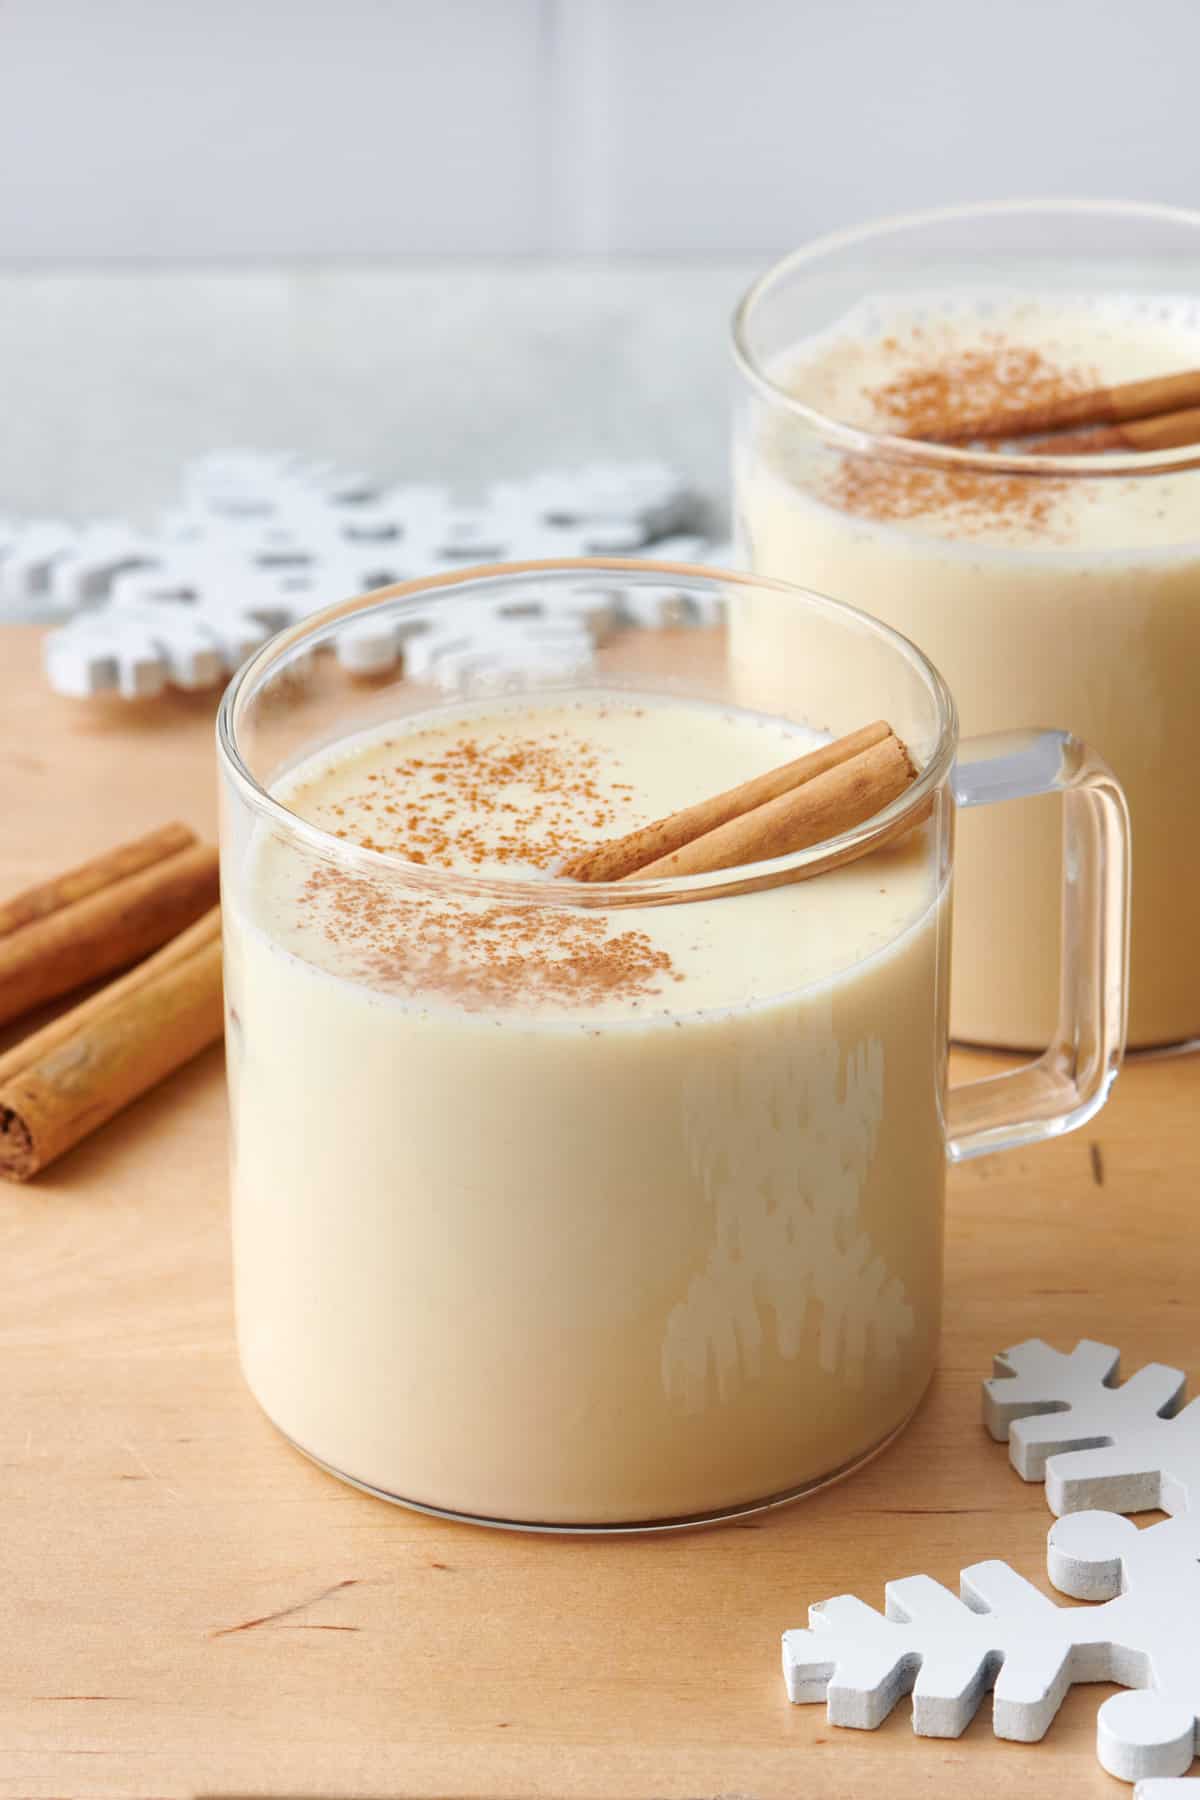 https://feelgoodfoodie.net/wp-content/uploads/2023/10/How-to-Make-Eggnog-10.jpg